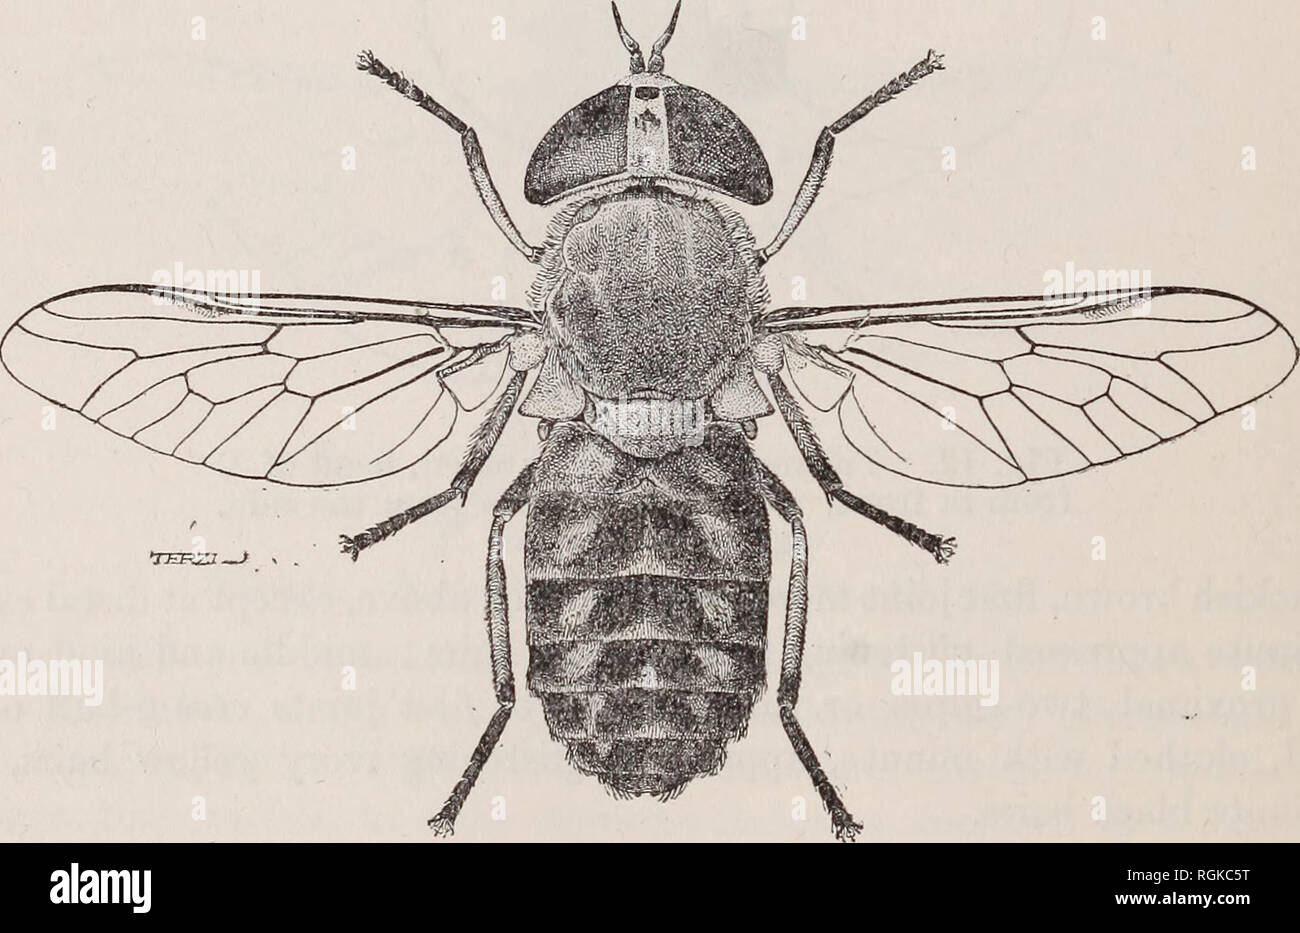 . Bulletin of entomological research. Entomology. 312 EENEST E. AUSTEN. 14. Tabanus leleani, sp. n. (figs. 13,14.) (J P.—Length, £ (8 specimens) 12 to 14 mm., $ (17 specimens) 11 to 14*6 mm.; width, of head, &lt;J 4*4 to 5*4 mm., $ 4'25 to 5*4 mm. ; width of front of $, at vertex 0*8 to 1 mm., across lower edge of frontal callus 0*5 to 0'75 mm.; length of wing, &lt;J 8-75 to 10-8 mm., $ 8*75 to 11*6 mm. In general appearance looking like a greyish form of Tabanus cordiger, Mg., with which it closely agrees as regards pattern of abdominal markings, and dimensions and other details of $ front. E Stock Photo